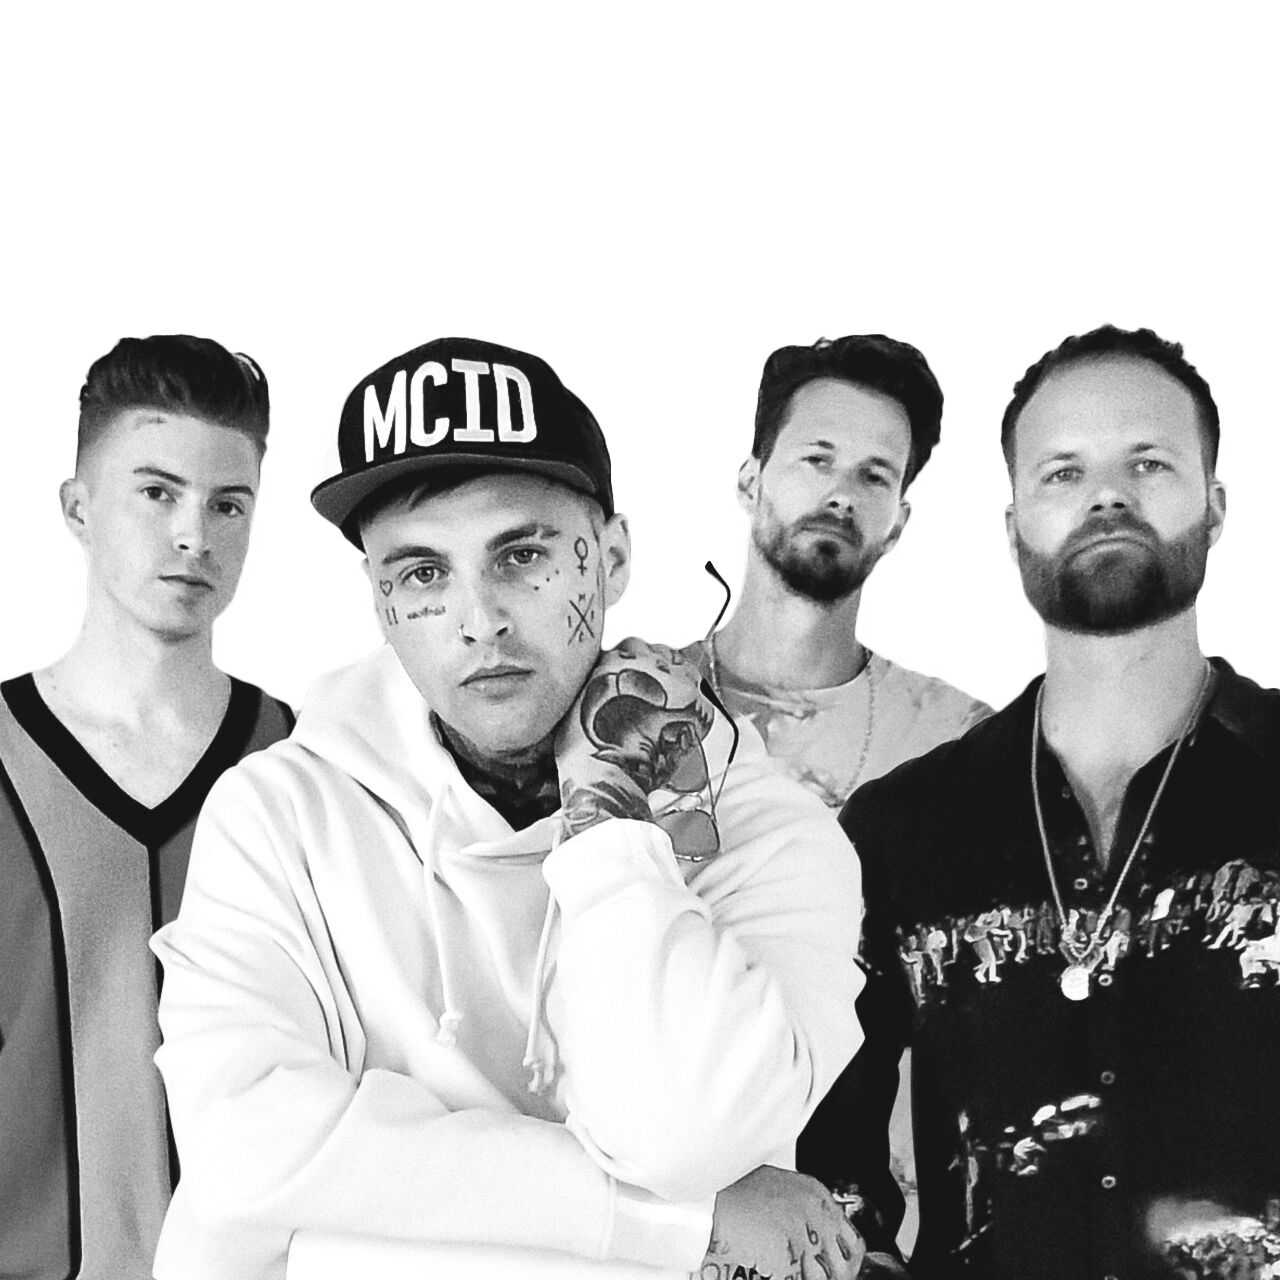 Highly Suspect reach #1 + Album MCID out tomorrow w/ Young Thug, Tee Grrizzley, Gojira, and more       